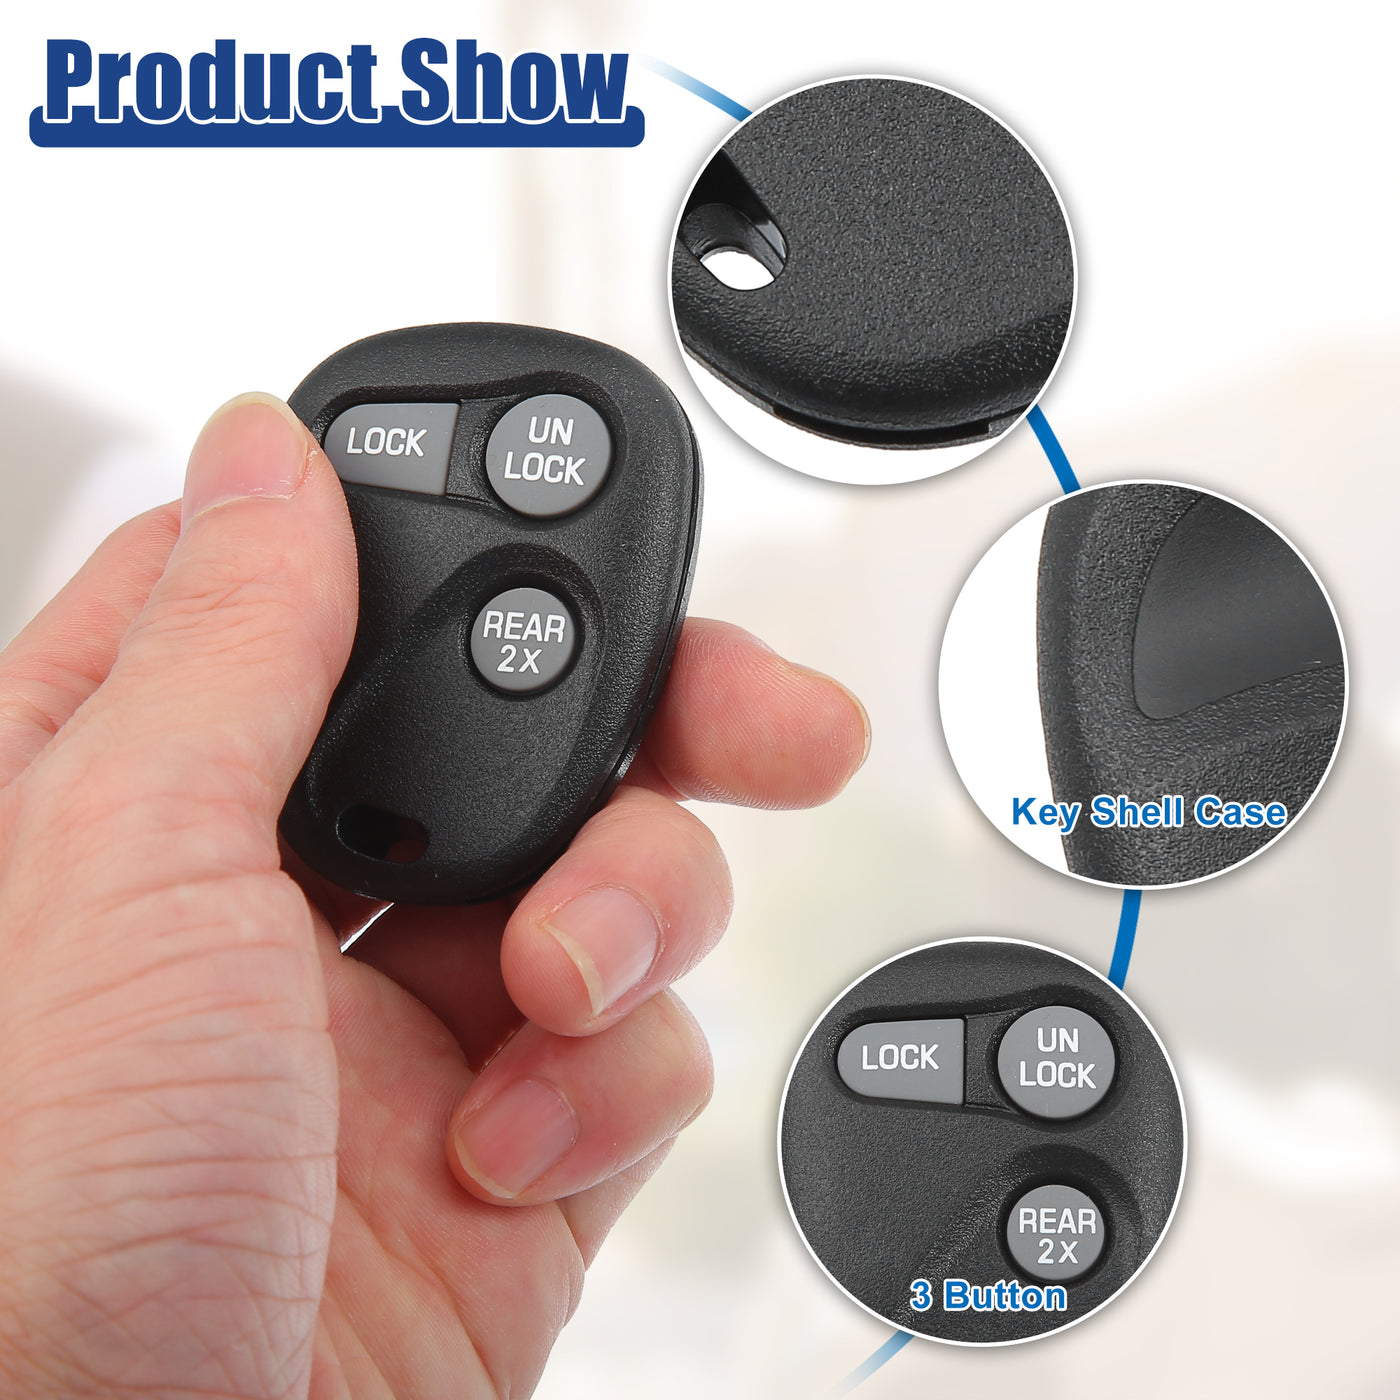 ACROPIX 315 MHz Car Key Fob Keyless Entry Remote Fit for Chevy Express 1500 2500 3500 1998-2002 for GMC Savana 1500 2500 3500 1998-2002 AB01502T 16245100 - Pack of 1 Black